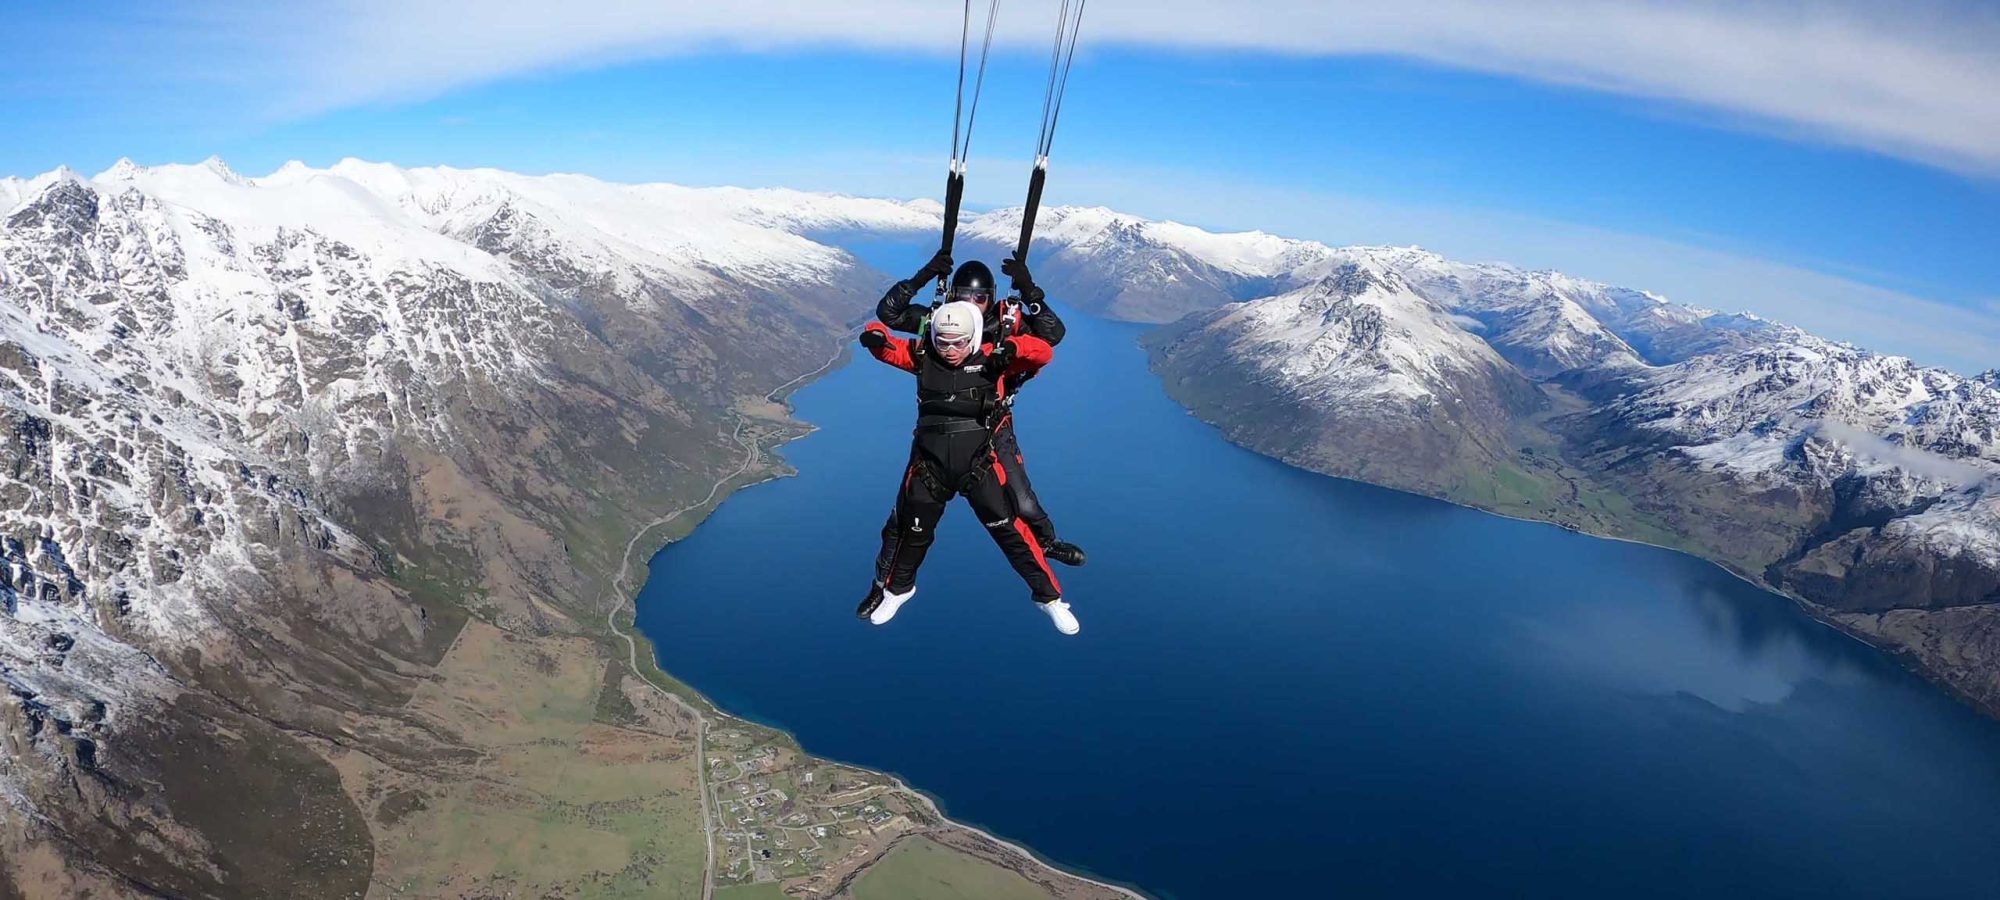 Region-Queenstown-Central-Otago-Skydiving-View-Mountains-Lake-People-1-Banner